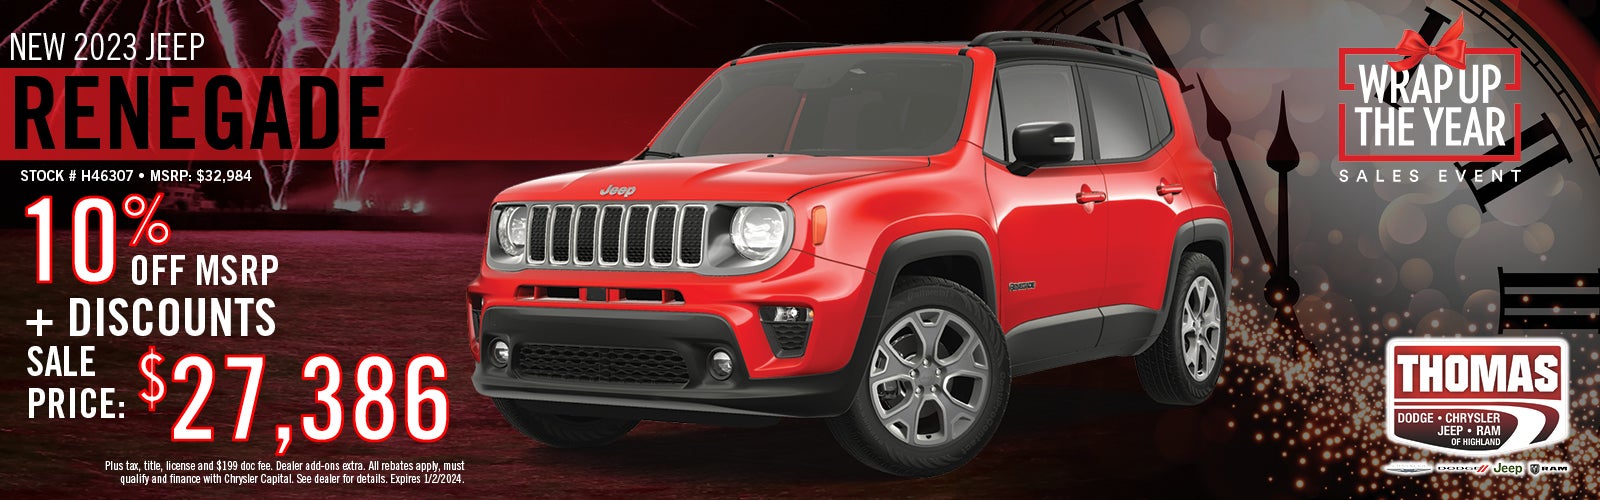 2023 Jeep Renegade Buy Offer